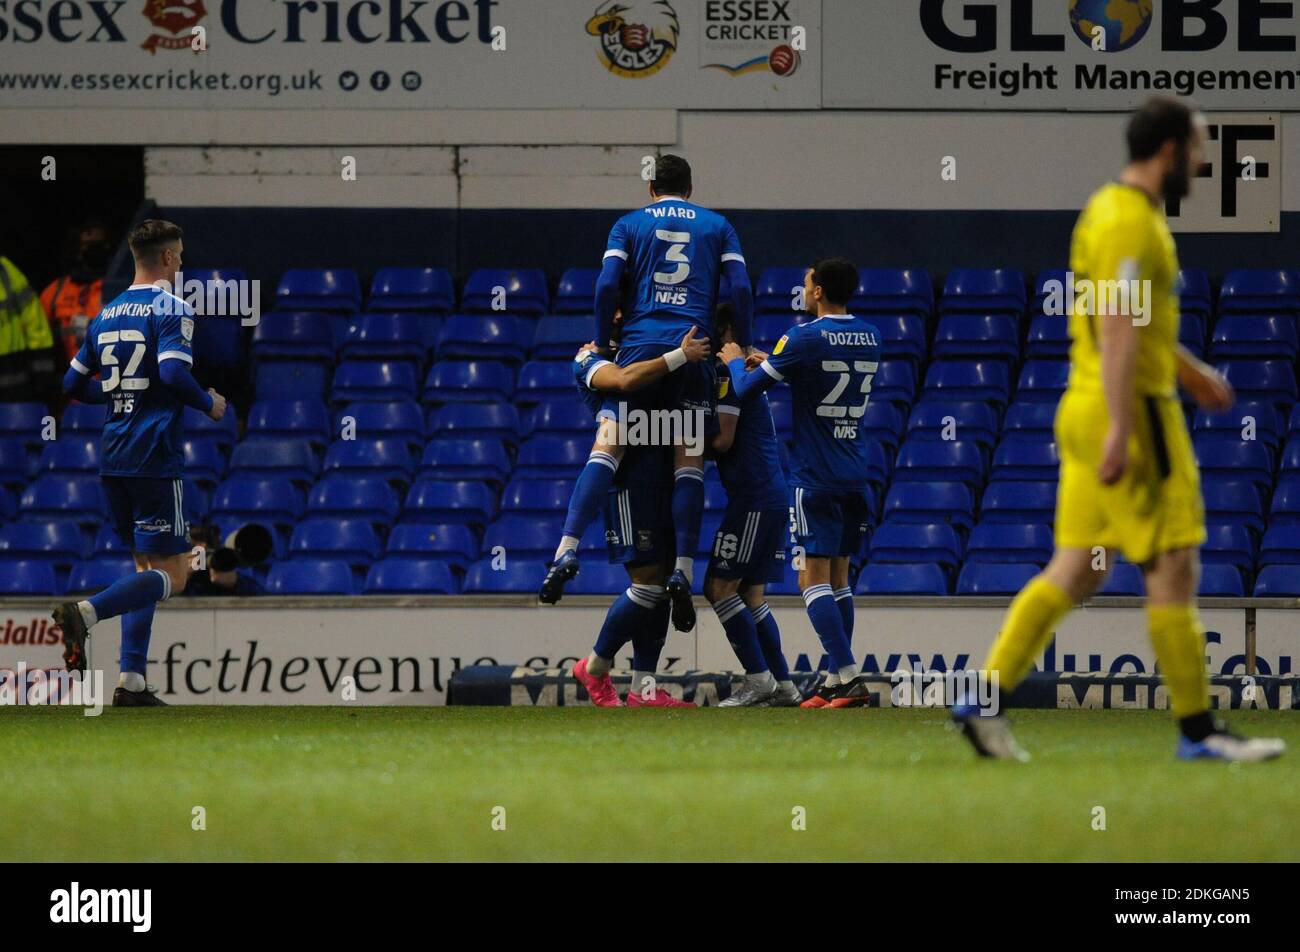 Ipswich, Suffolk, UK. 15th December, 2020. Ipswichs Keanan Bennetts scores the opening goal during the Sky Bet League 1 match between Ipswich Town and Burton Albion at Portman Road, Ipswich on Tuesday 15th December 2020. (Credit: Ben Pooley | MI News) Credit: MI News & Sport /Alamy Live News Stock Photo